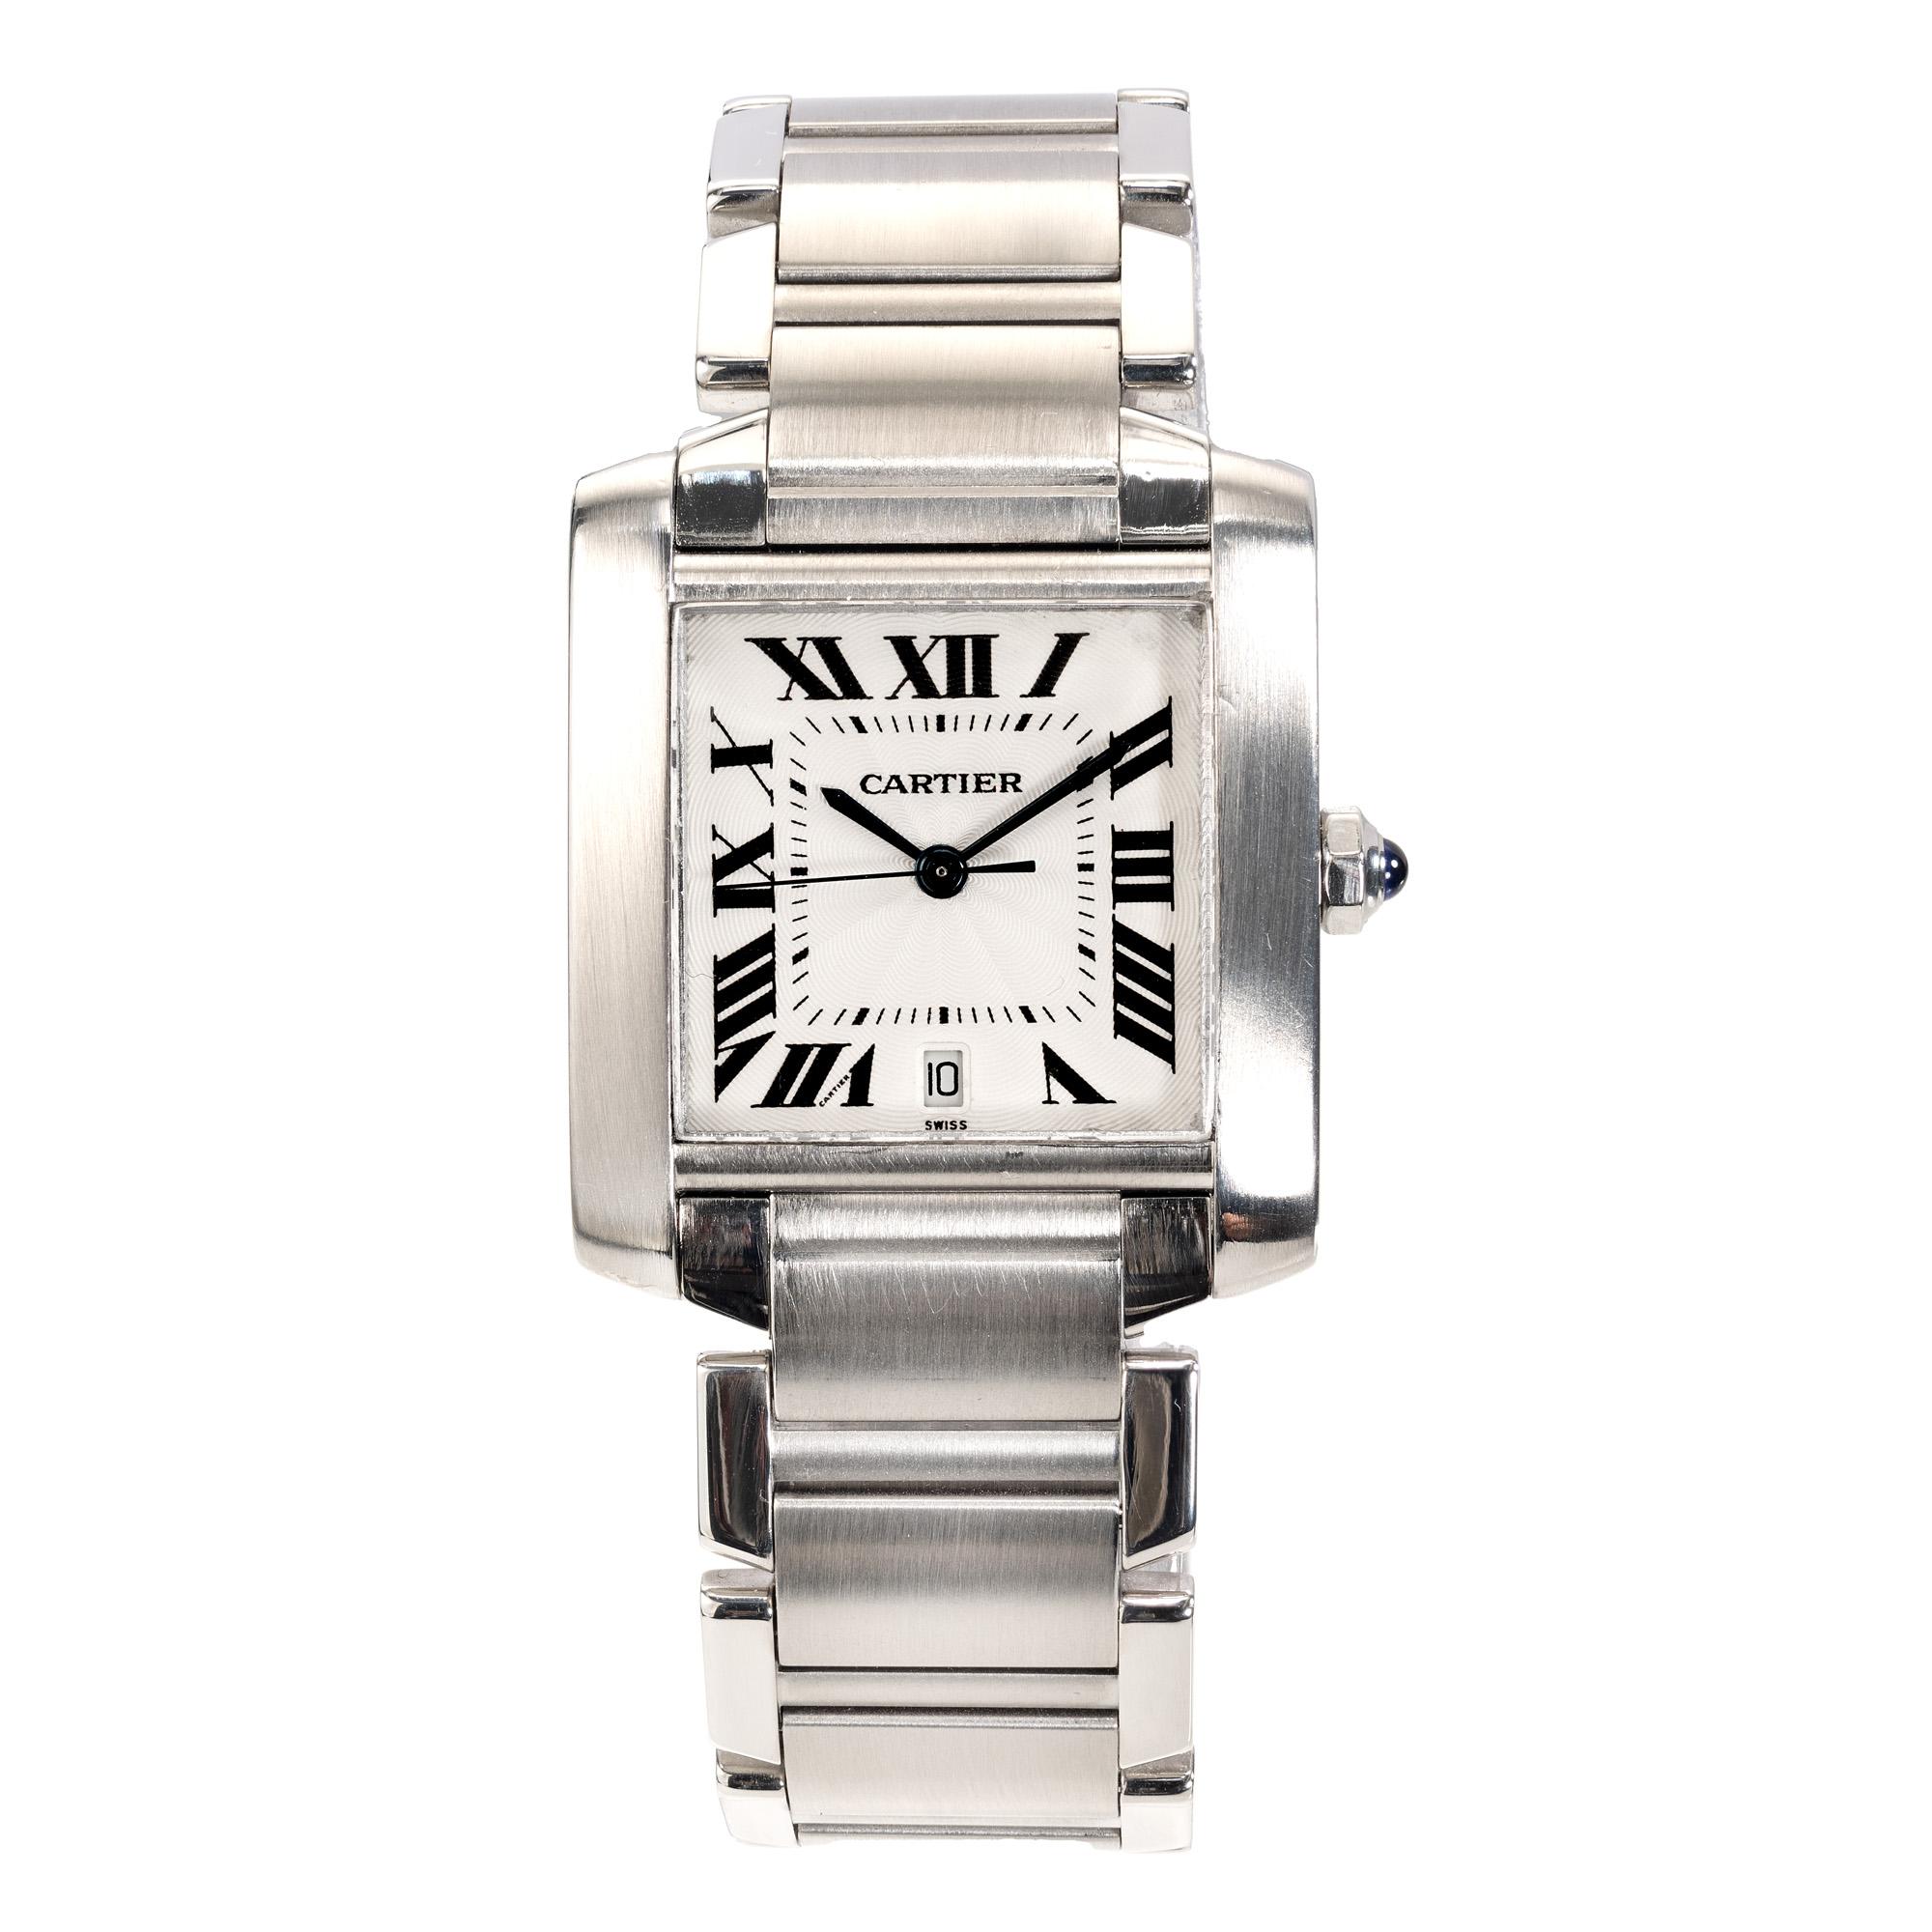 Cartier Stainless Steel Tank Francaise Wristwatch In Good Condition For Sale In Stamford, CT